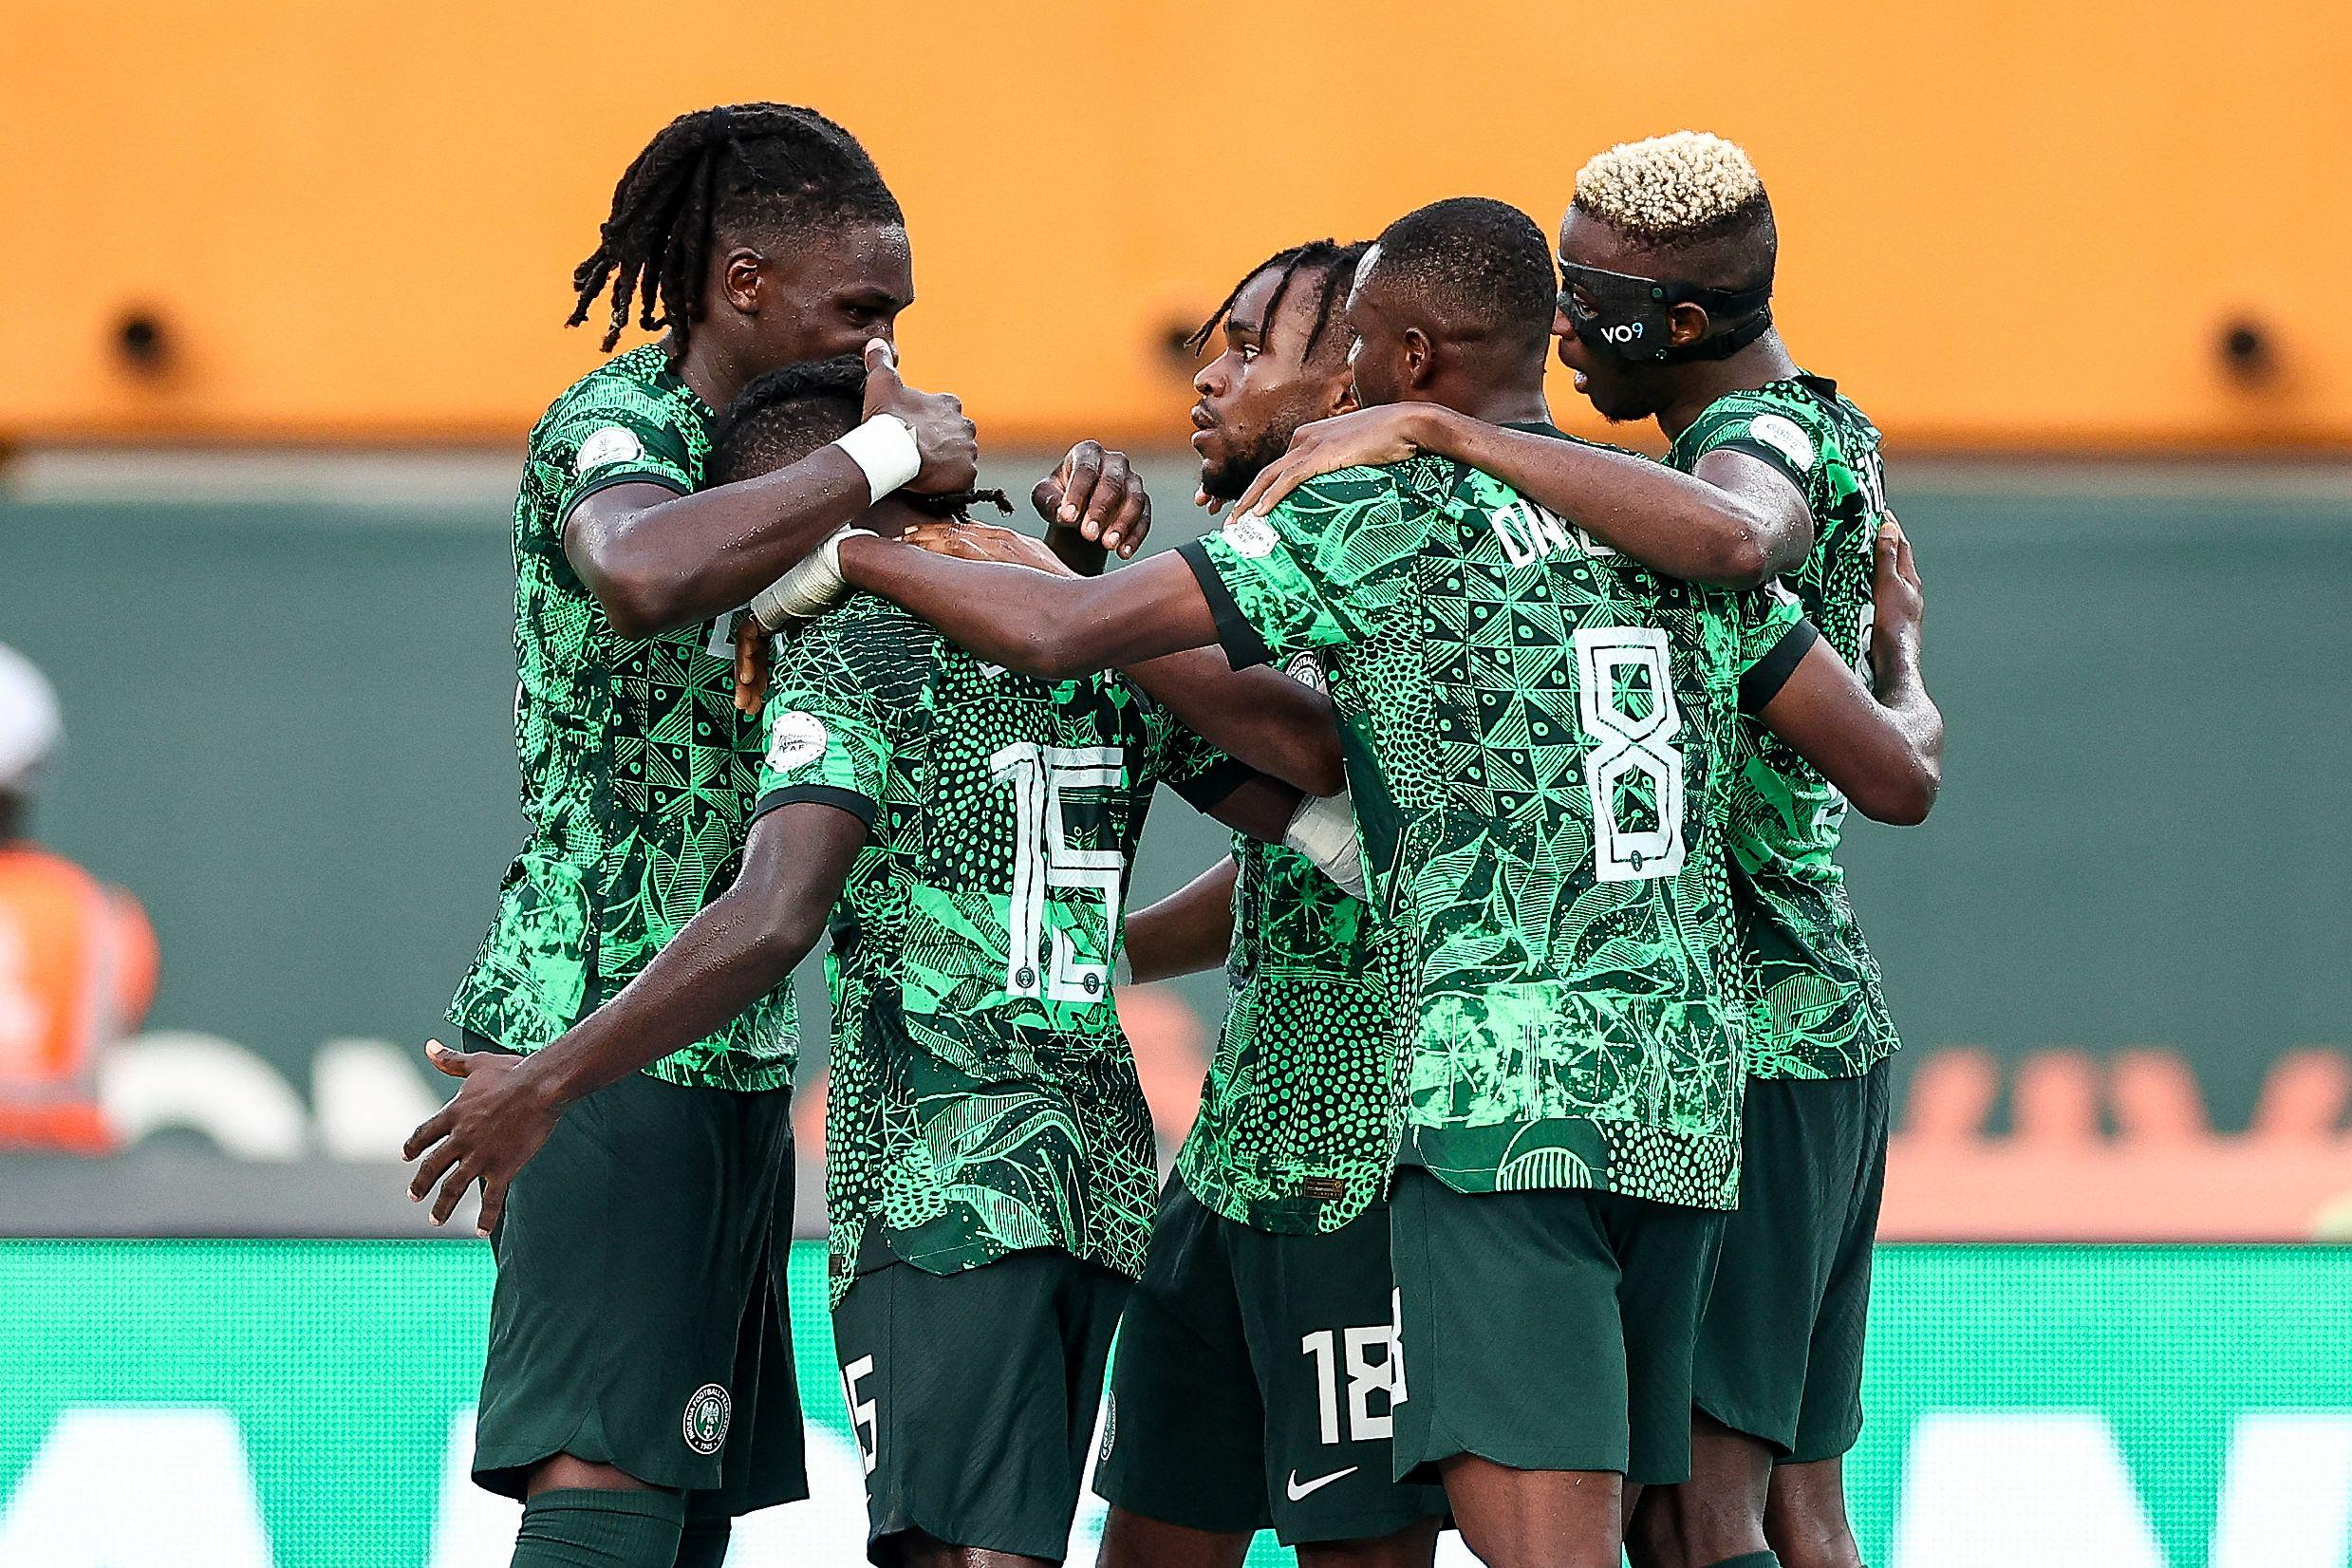 CAN: Nigeria dismisses Angola and reaches the semi-finals